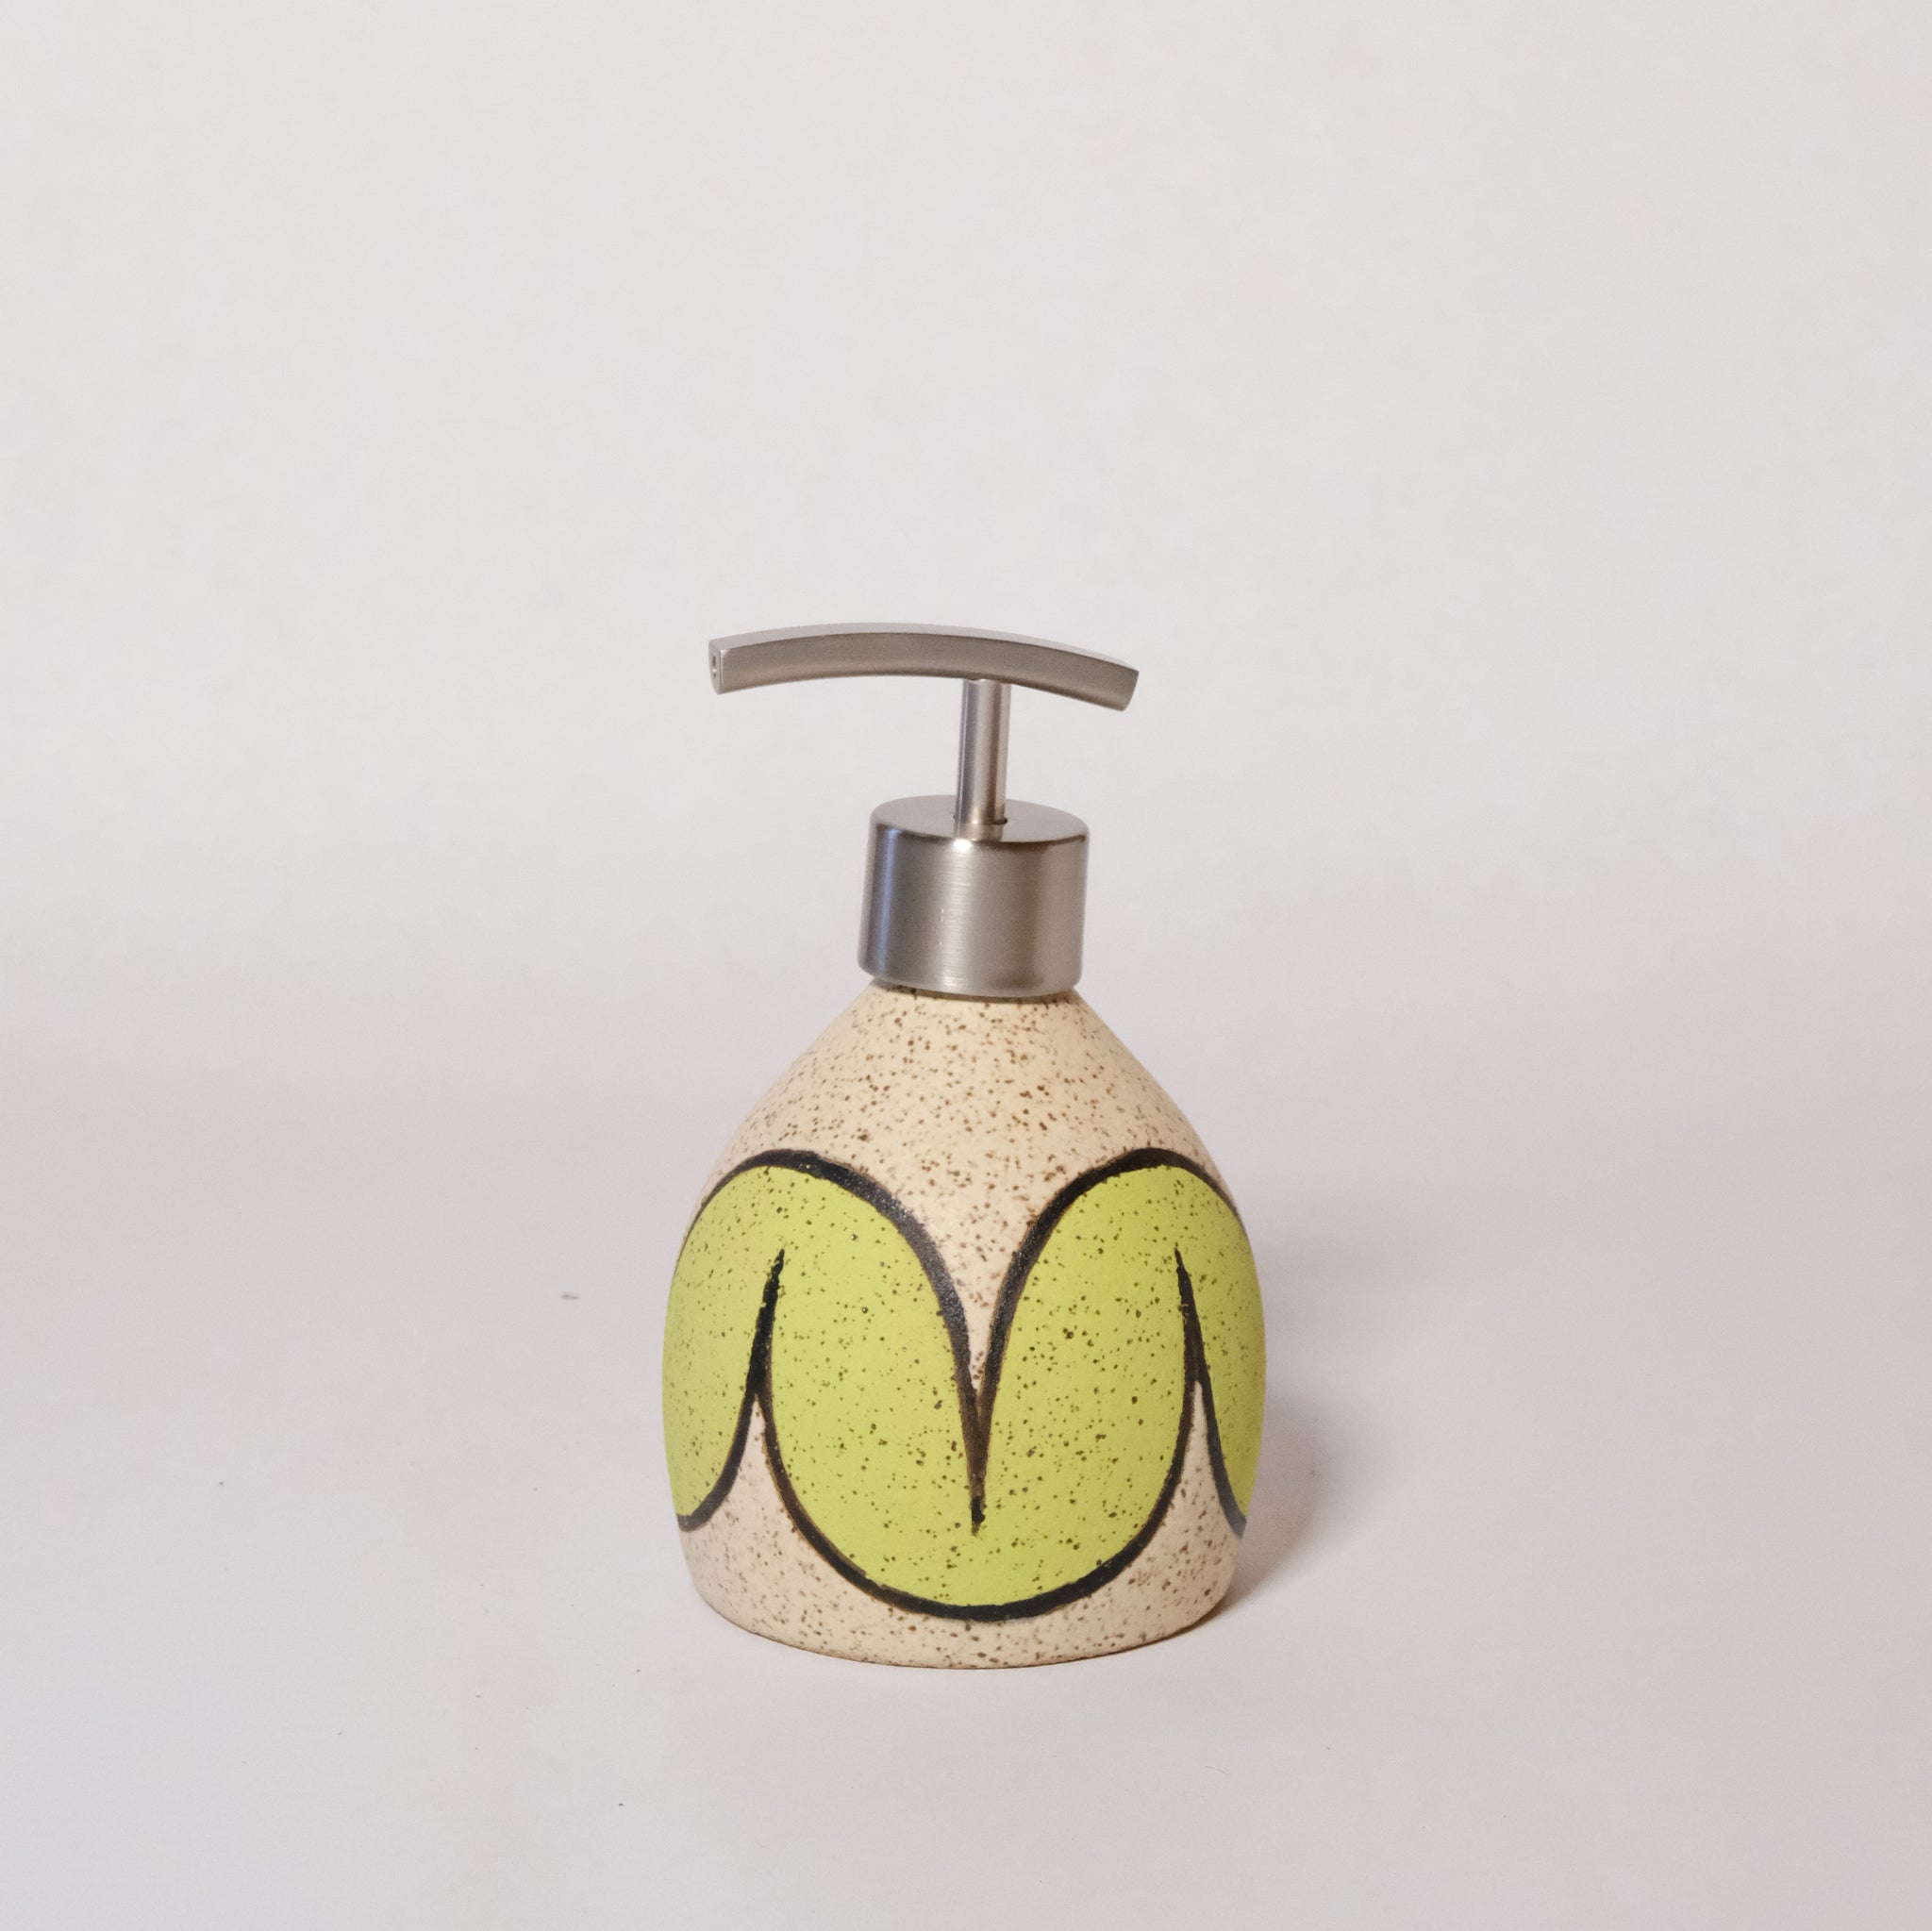 Glazed Stoneware Soap Dispenser with Chubby Squiggle Pattern